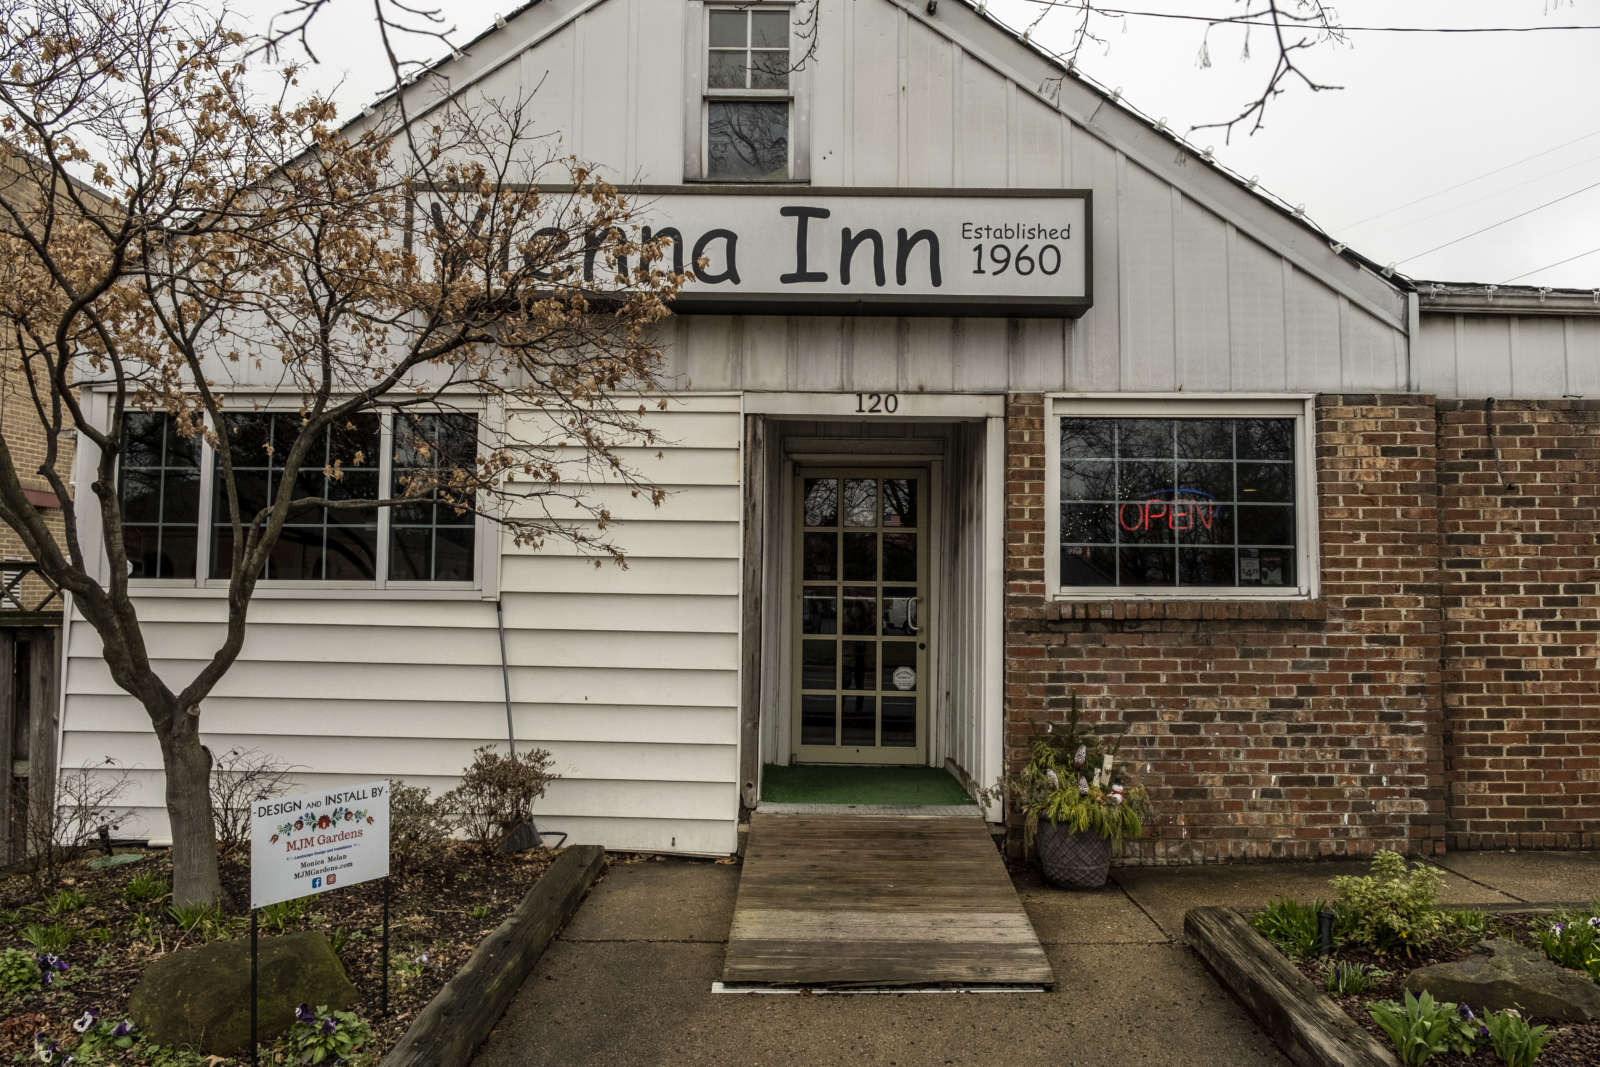 Vienna Inn Celebrating National Chili Day With Deals, Early Lunch